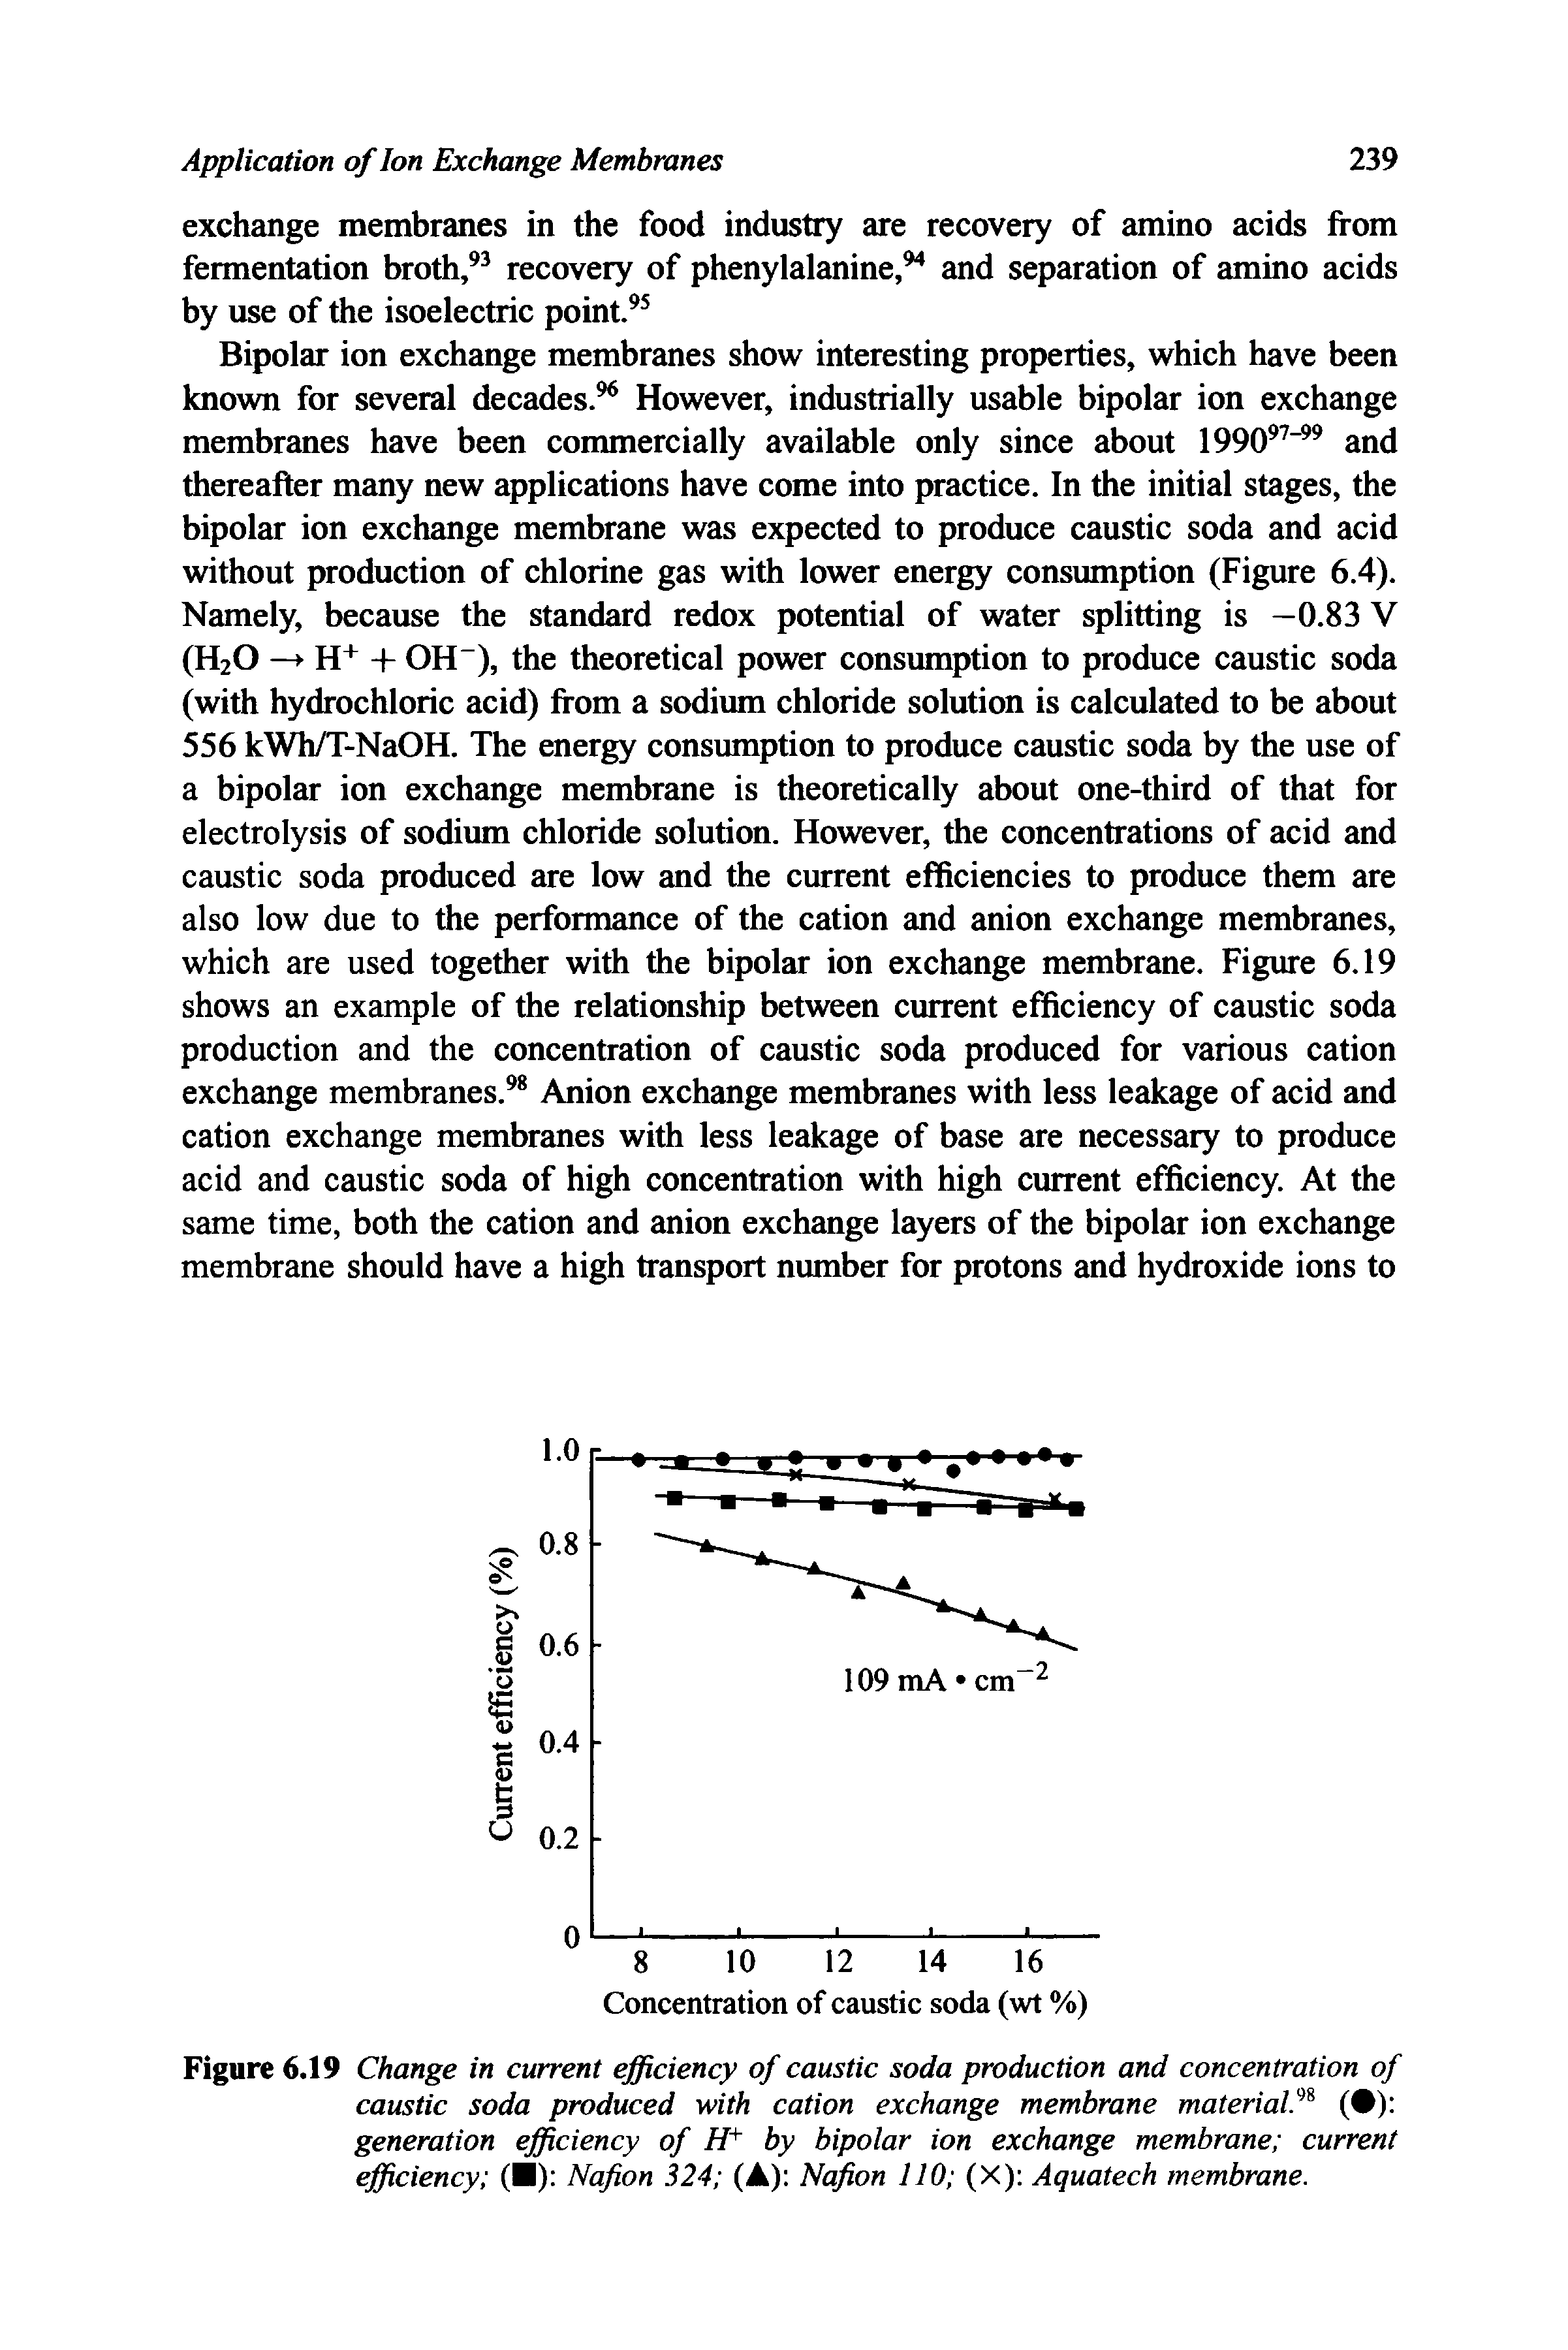 Figure 6.19 Change in current efficiency of caustic soda production and concentration of caustic soda produced with cation exchange membrane material ( ) generation efficiency of H+ by bipolar ion exchange membrane current efficiency ( ) Nafion 324 (A) Nafion 110 (X) Aquatech membrane.